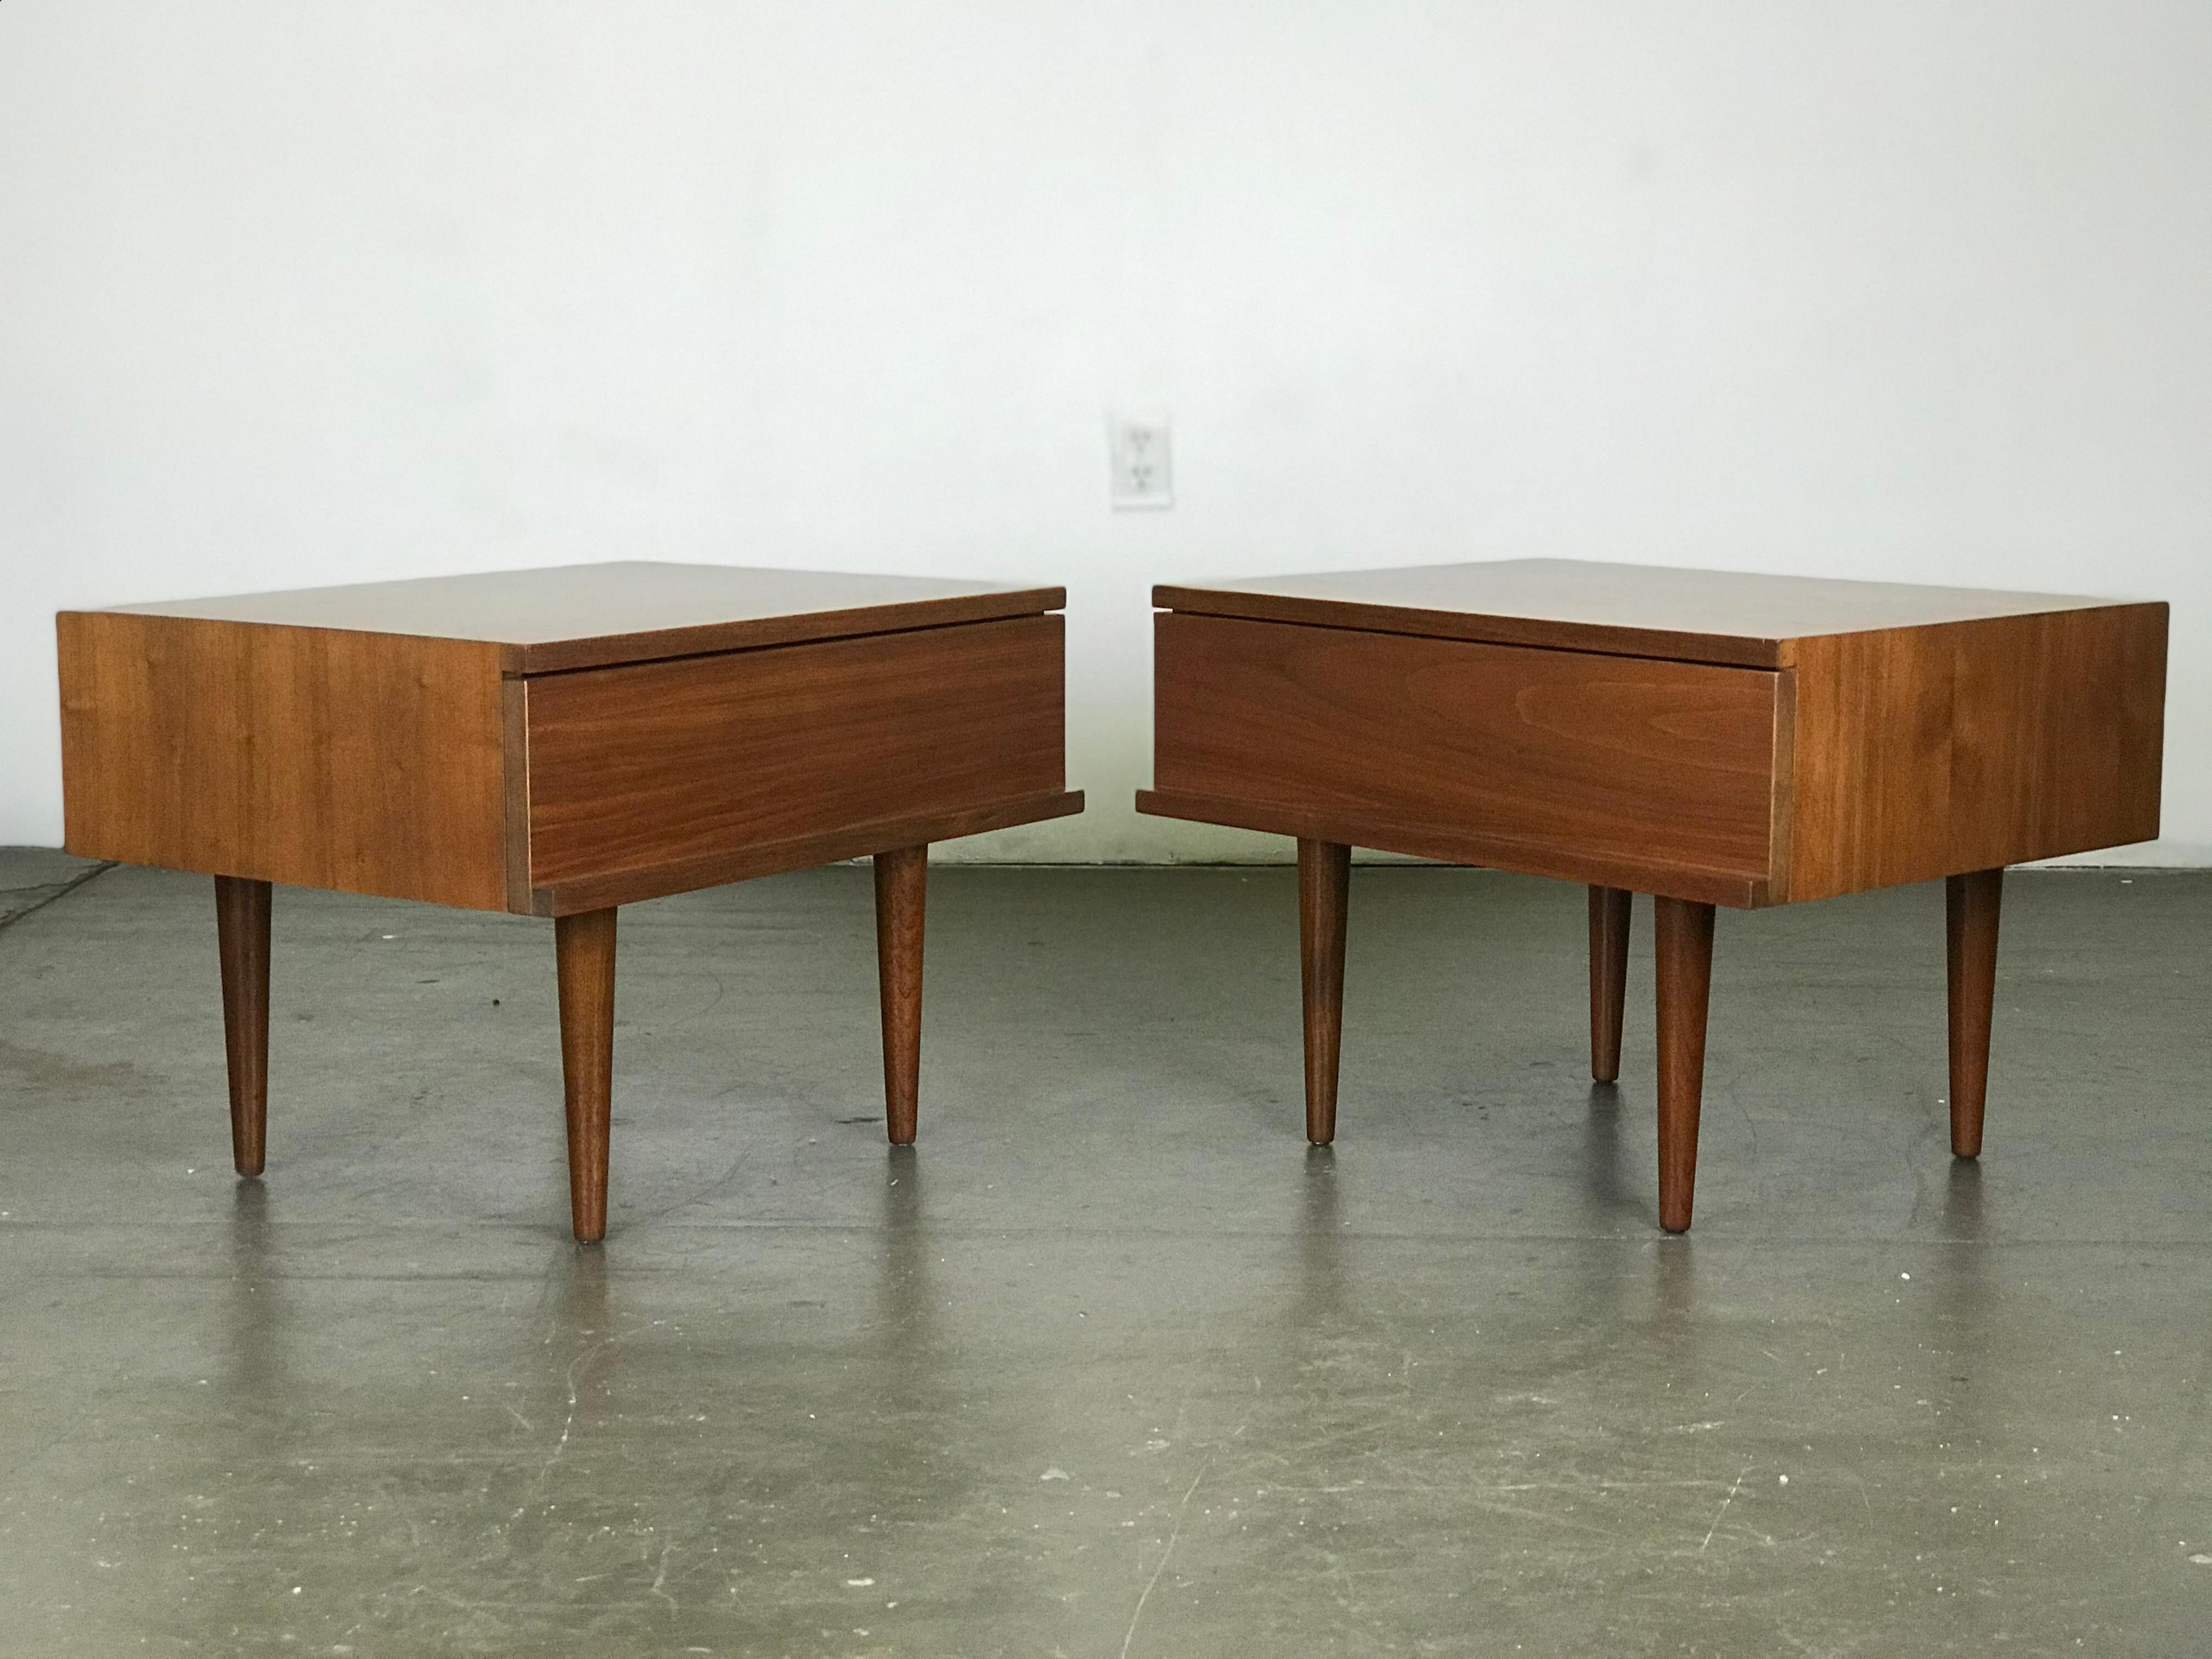 Scarce pair of Mel Smilow walnut nightstands for Smilow-Thiel furniture, 1950s. Refinished. Beautiful walnut grain.
*The legs unscrew making these tables shippable by parcel post. Please see that option for shipping.
**Reduced cost and or